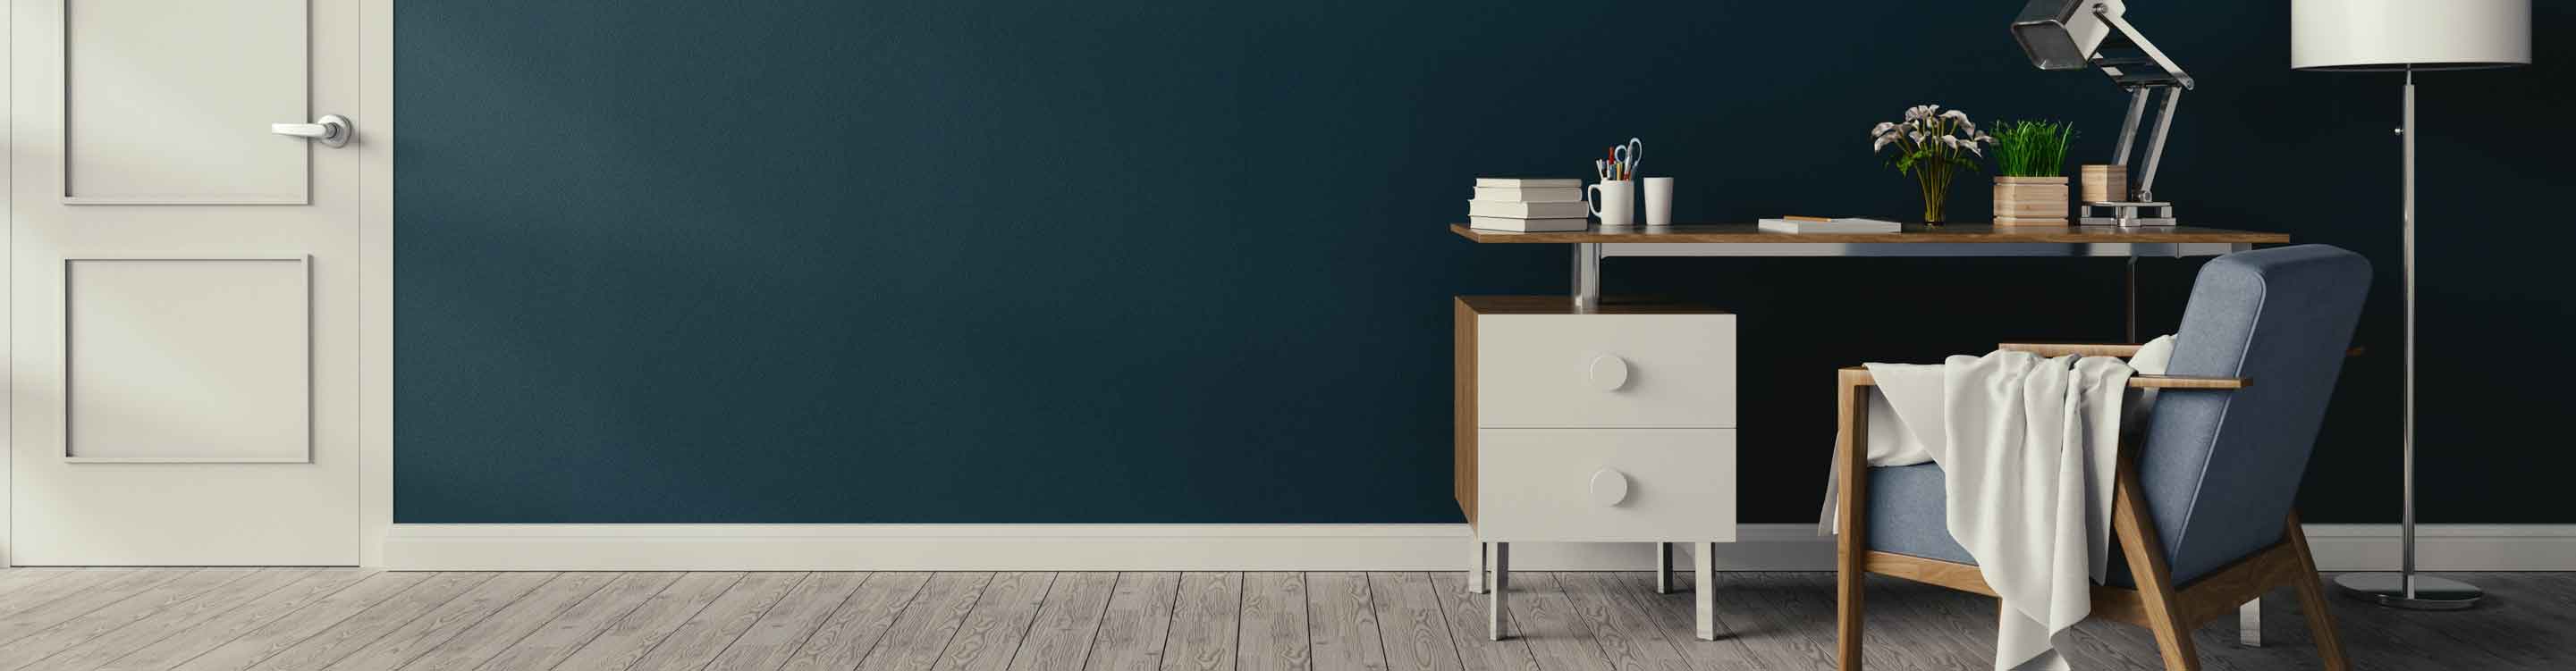 dark blue painted wall in home office